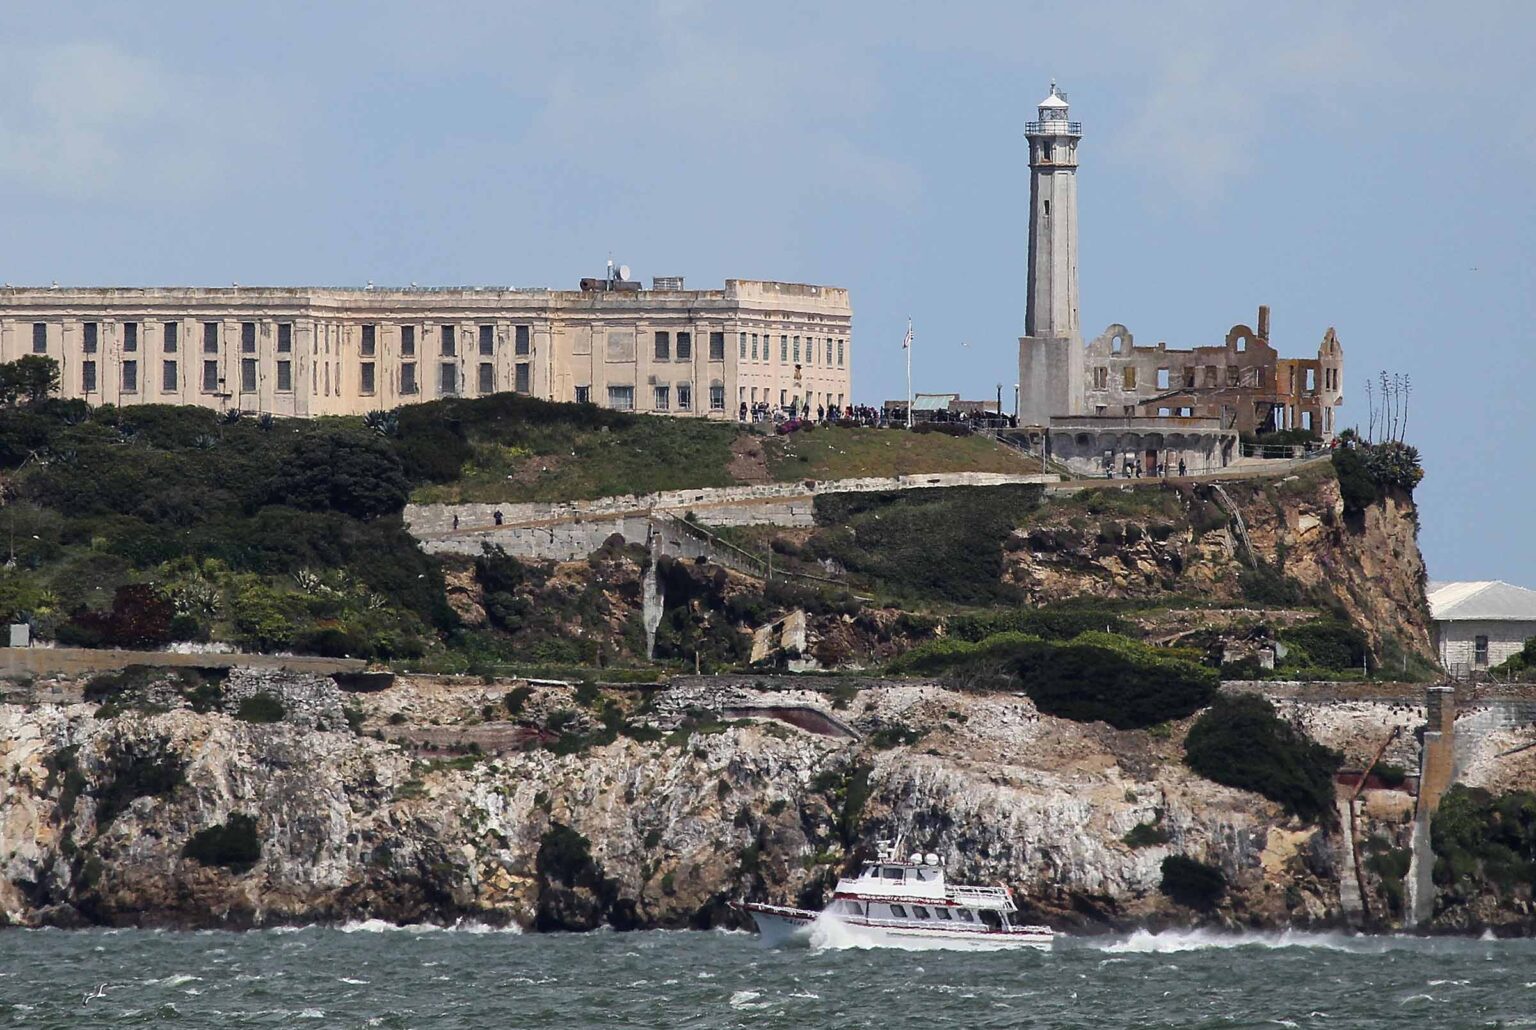 Alcatraz was known as the Rock for a reason: escape was next to impossible. But three men may have escaped after all, though it was never confirmed.